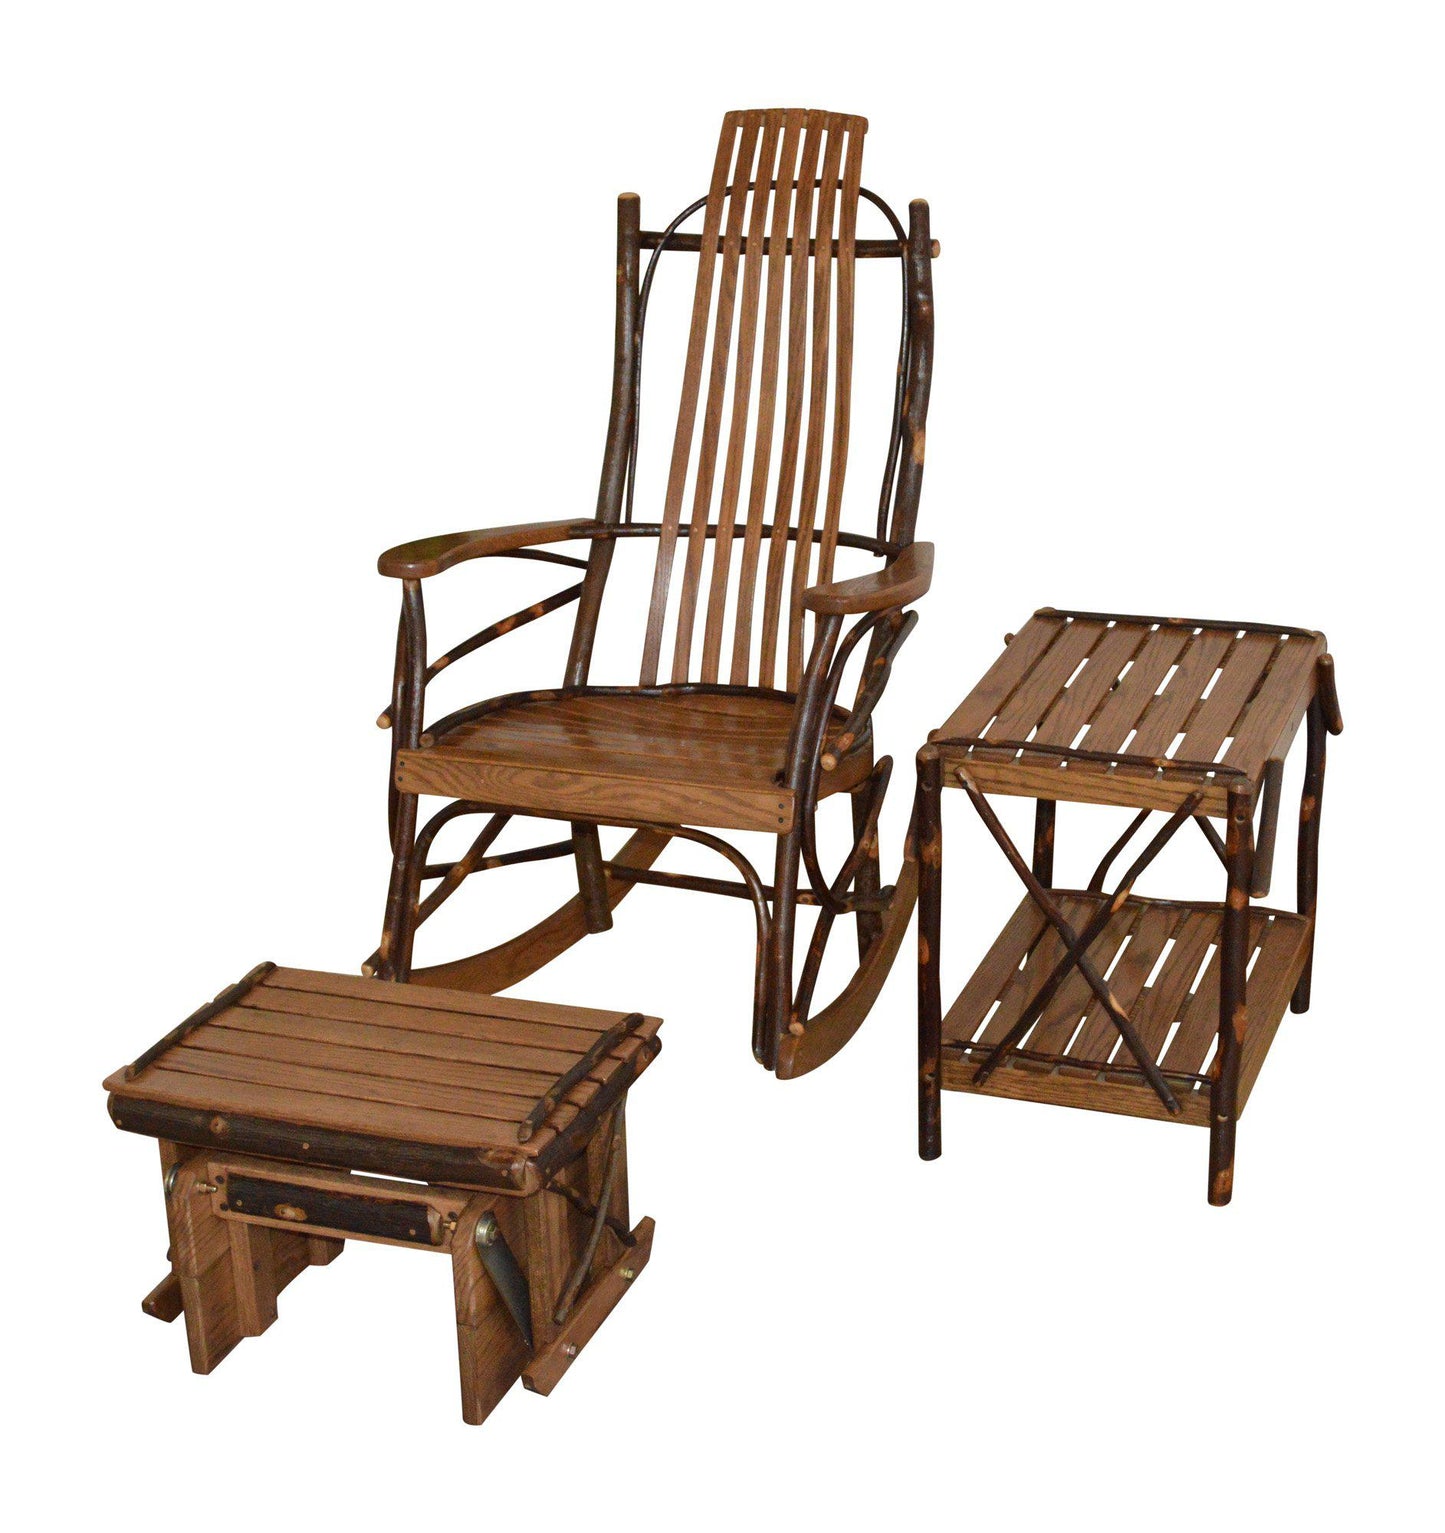 A&L Furniture Co. Amish Bentwood 7-Slat Hickory Rocking Chair With Gliding Ottoman and End Table Set - LEAD TIME TO SHIP 4 WEEKS OR LESS